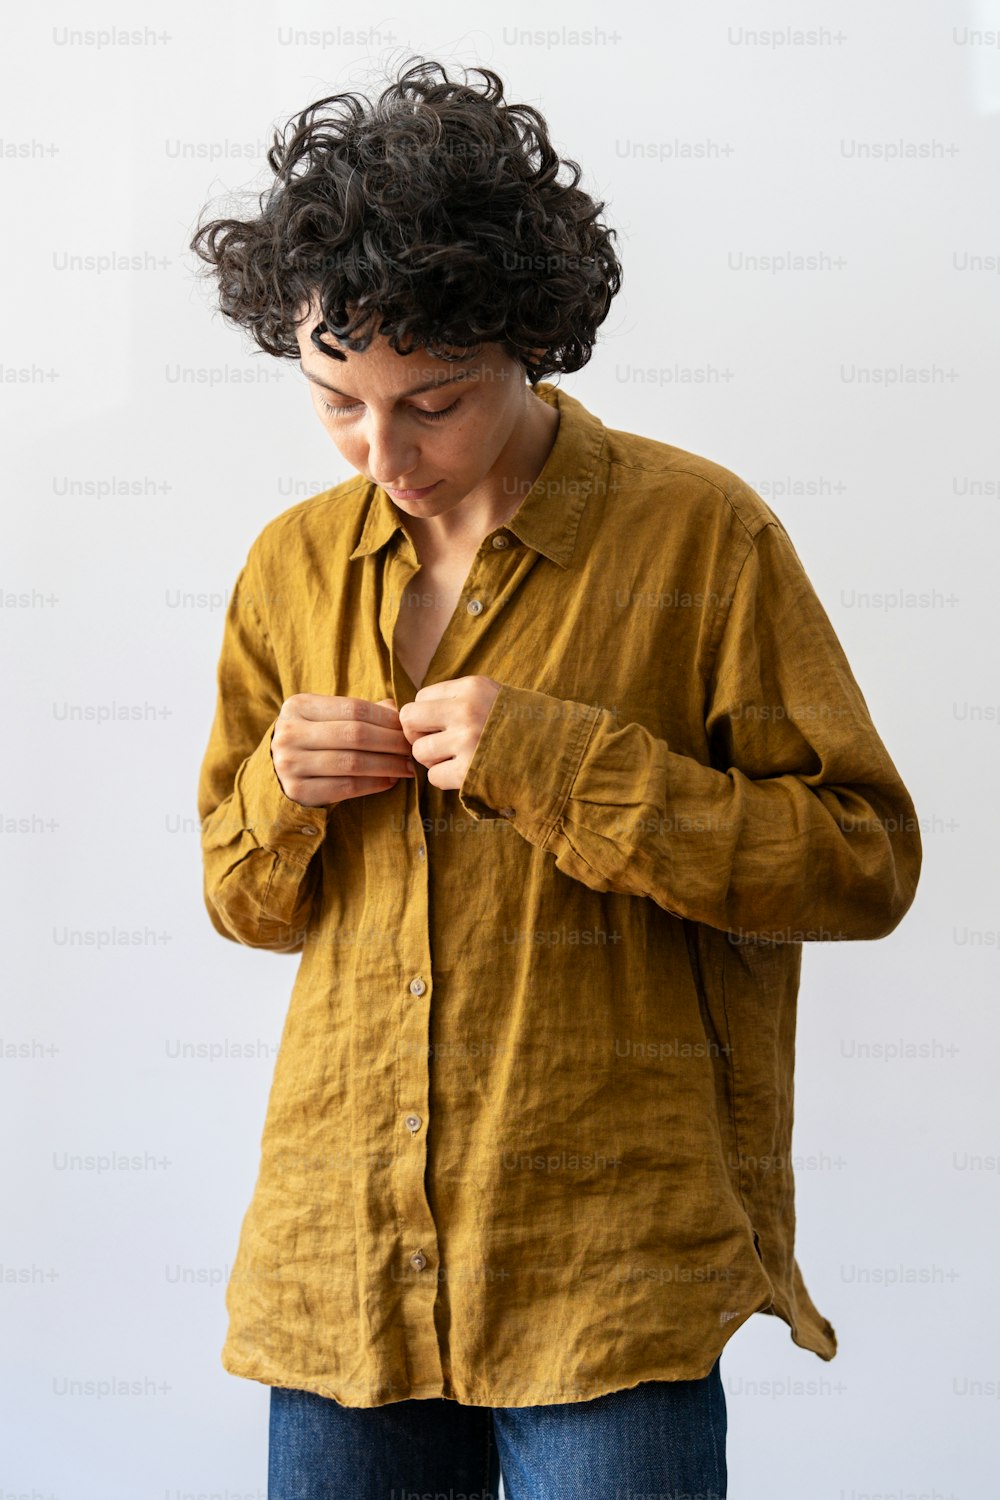 a woman in a yellow shirt is looking down